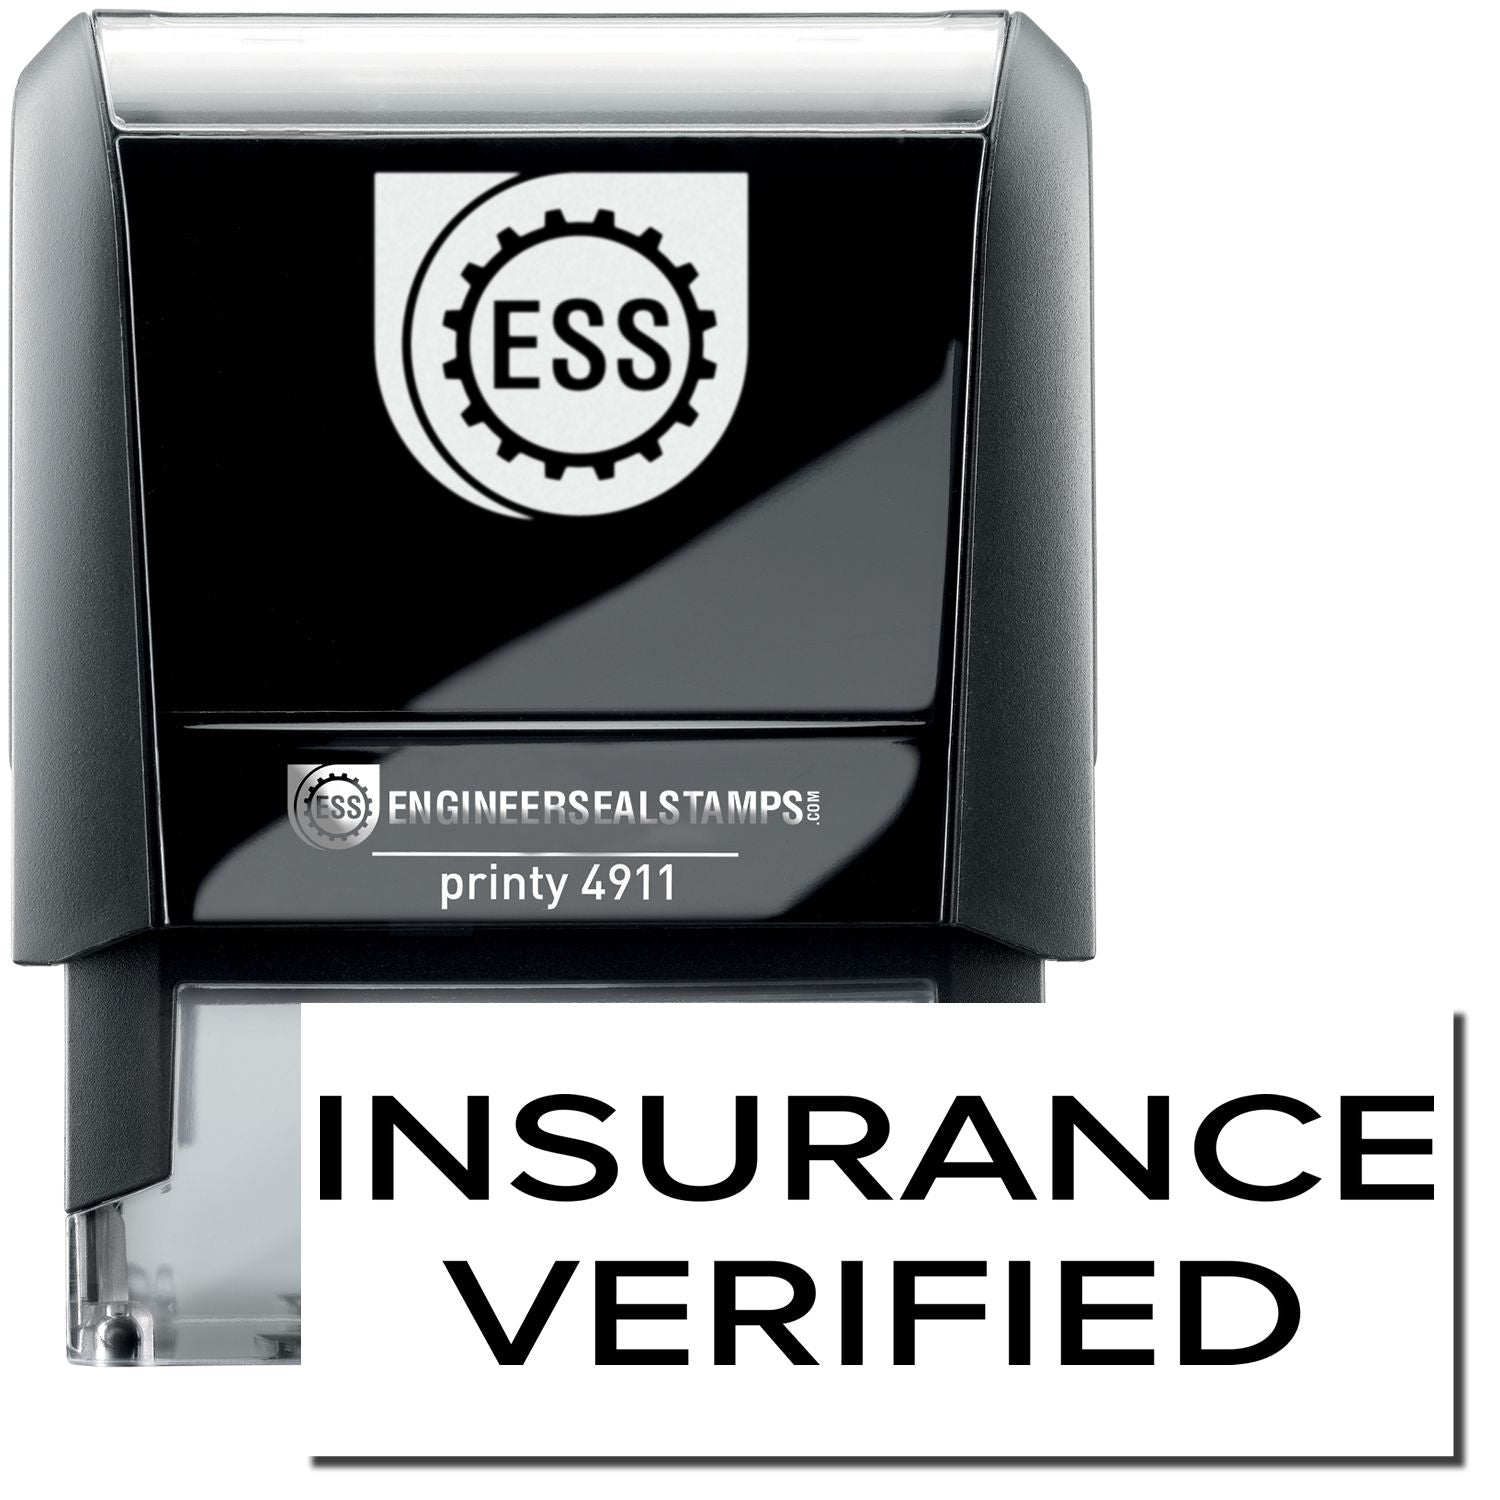 A self-inking stamp with a stamped image showing how the text "INSURANCE VERIFIED" in a narrow font is displayed after stamping.